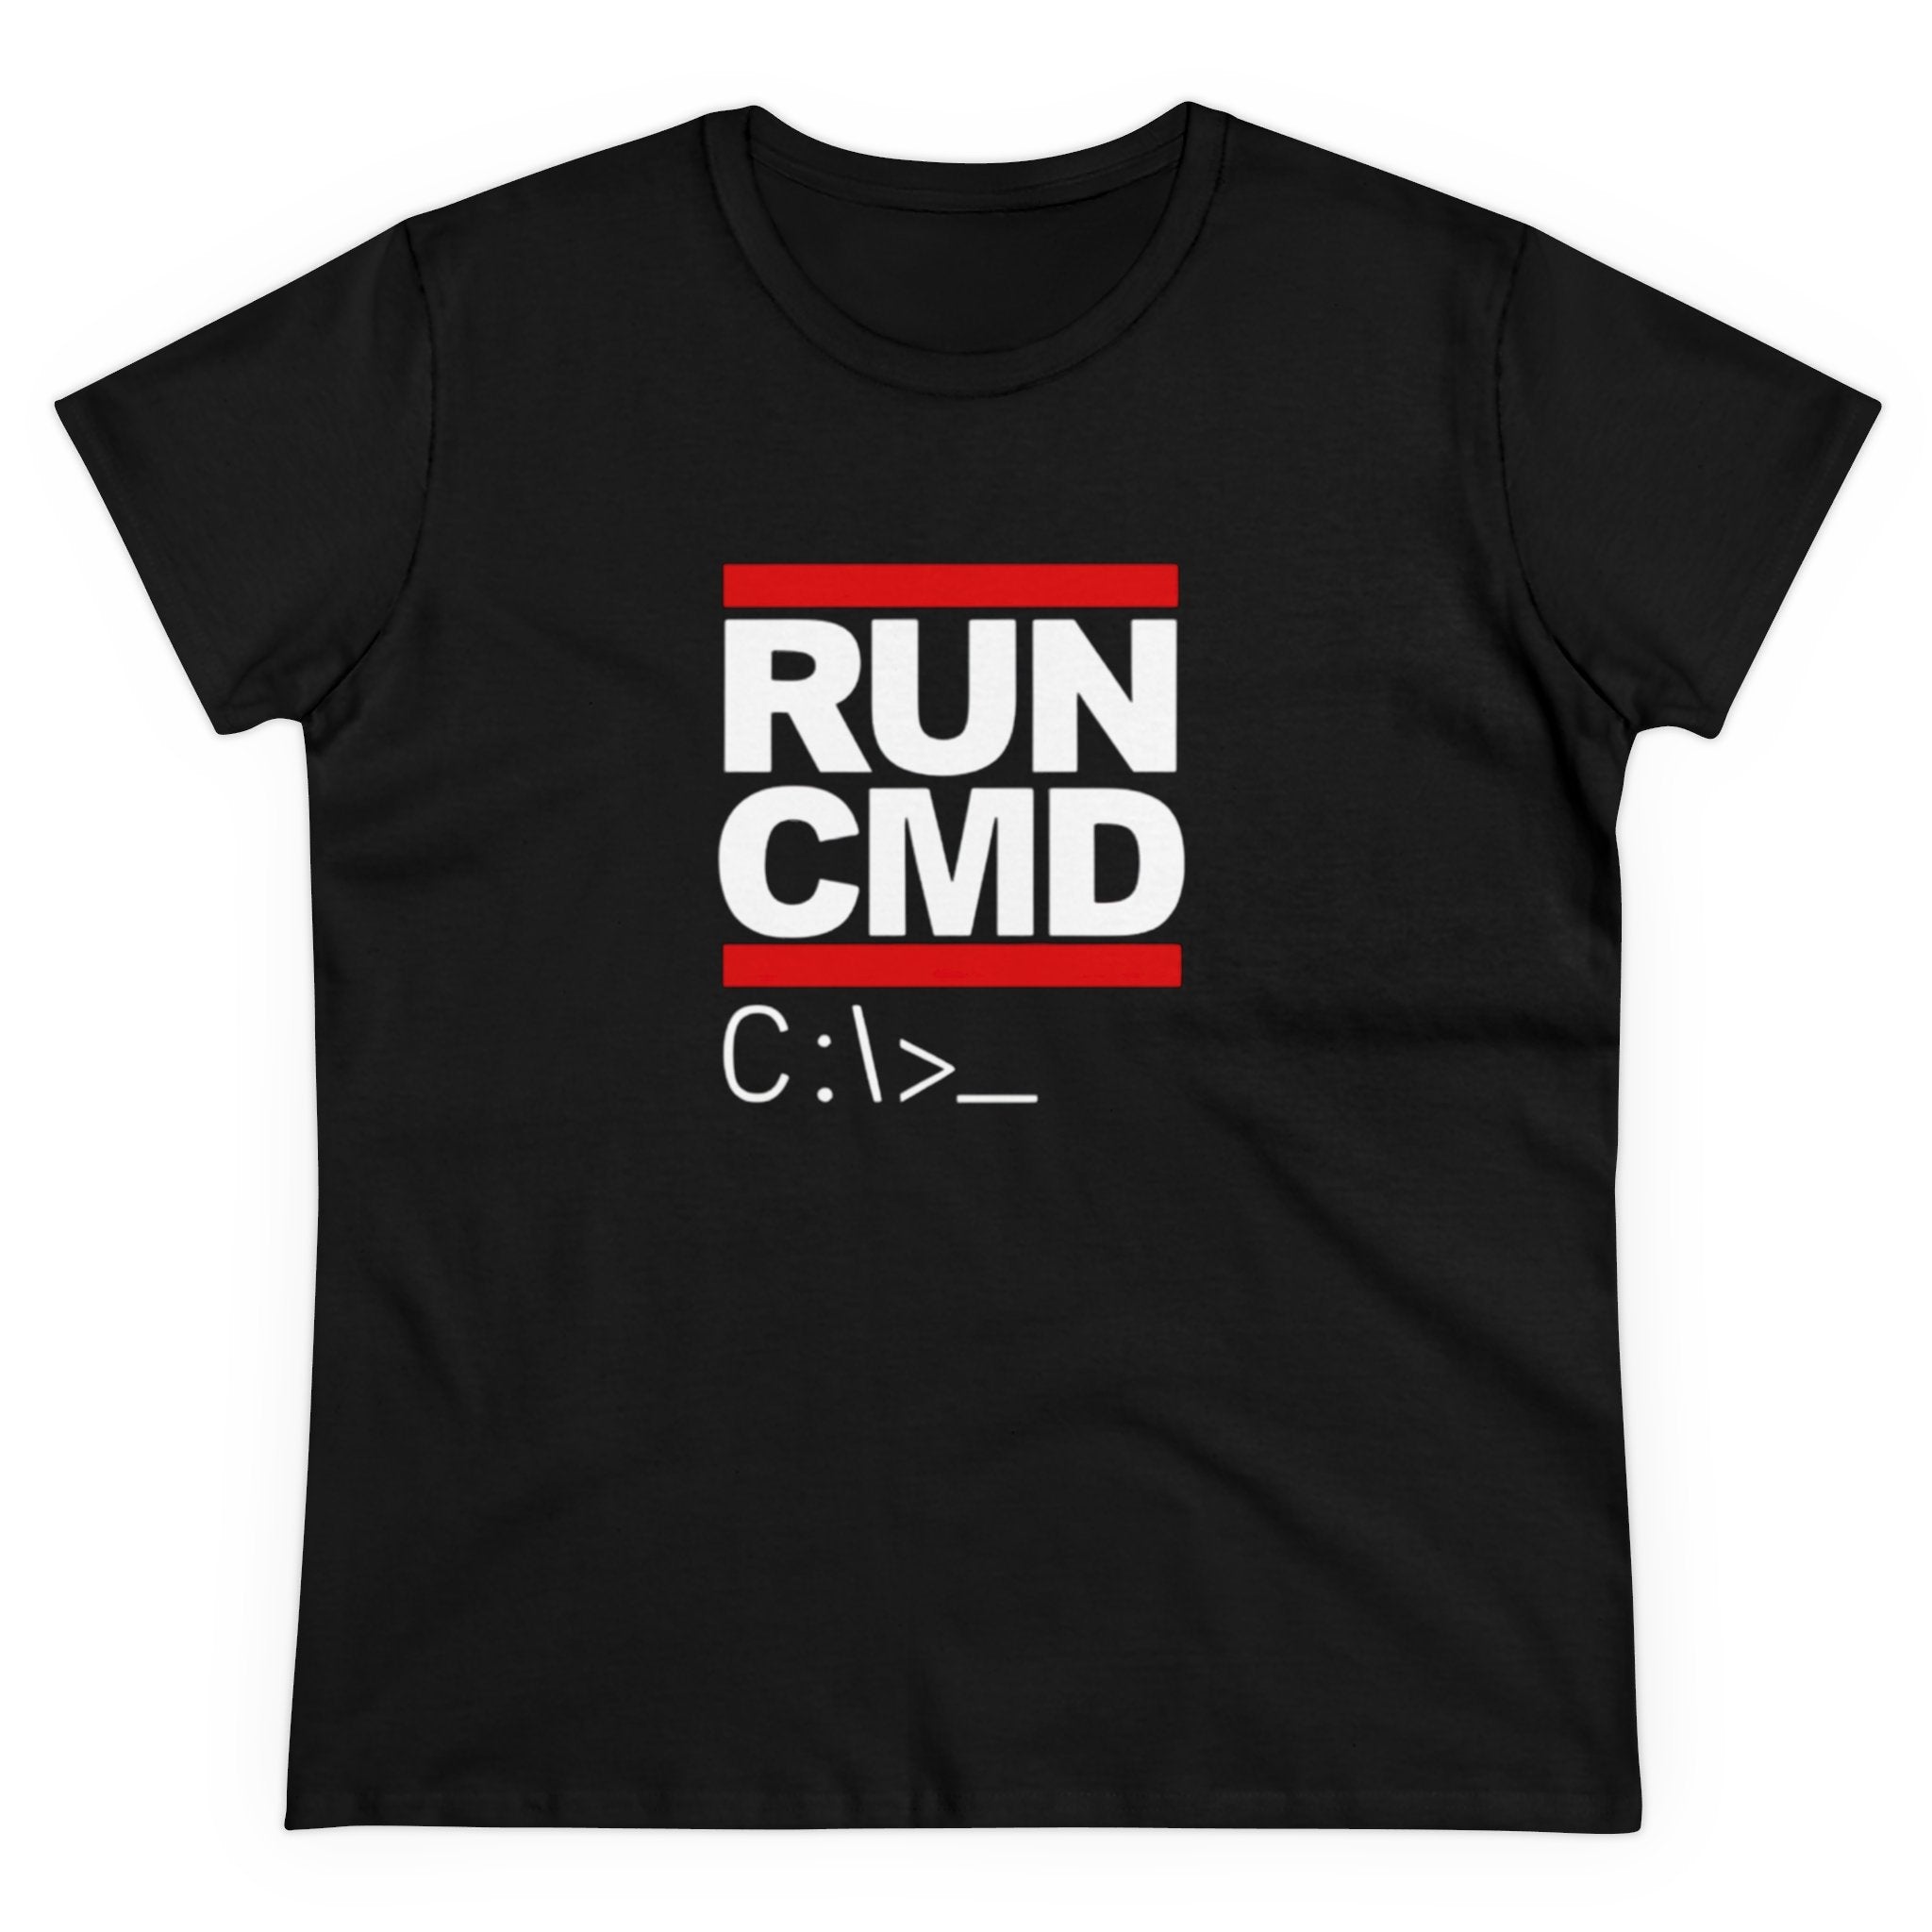 A black RUN CMD - Women's Tee featuring a RUN CMD design in large white letters, highlighted with red lines above and below, and "C:\>" printed below in smaller white text. Crafted from comforting cotton for all-day comfort.